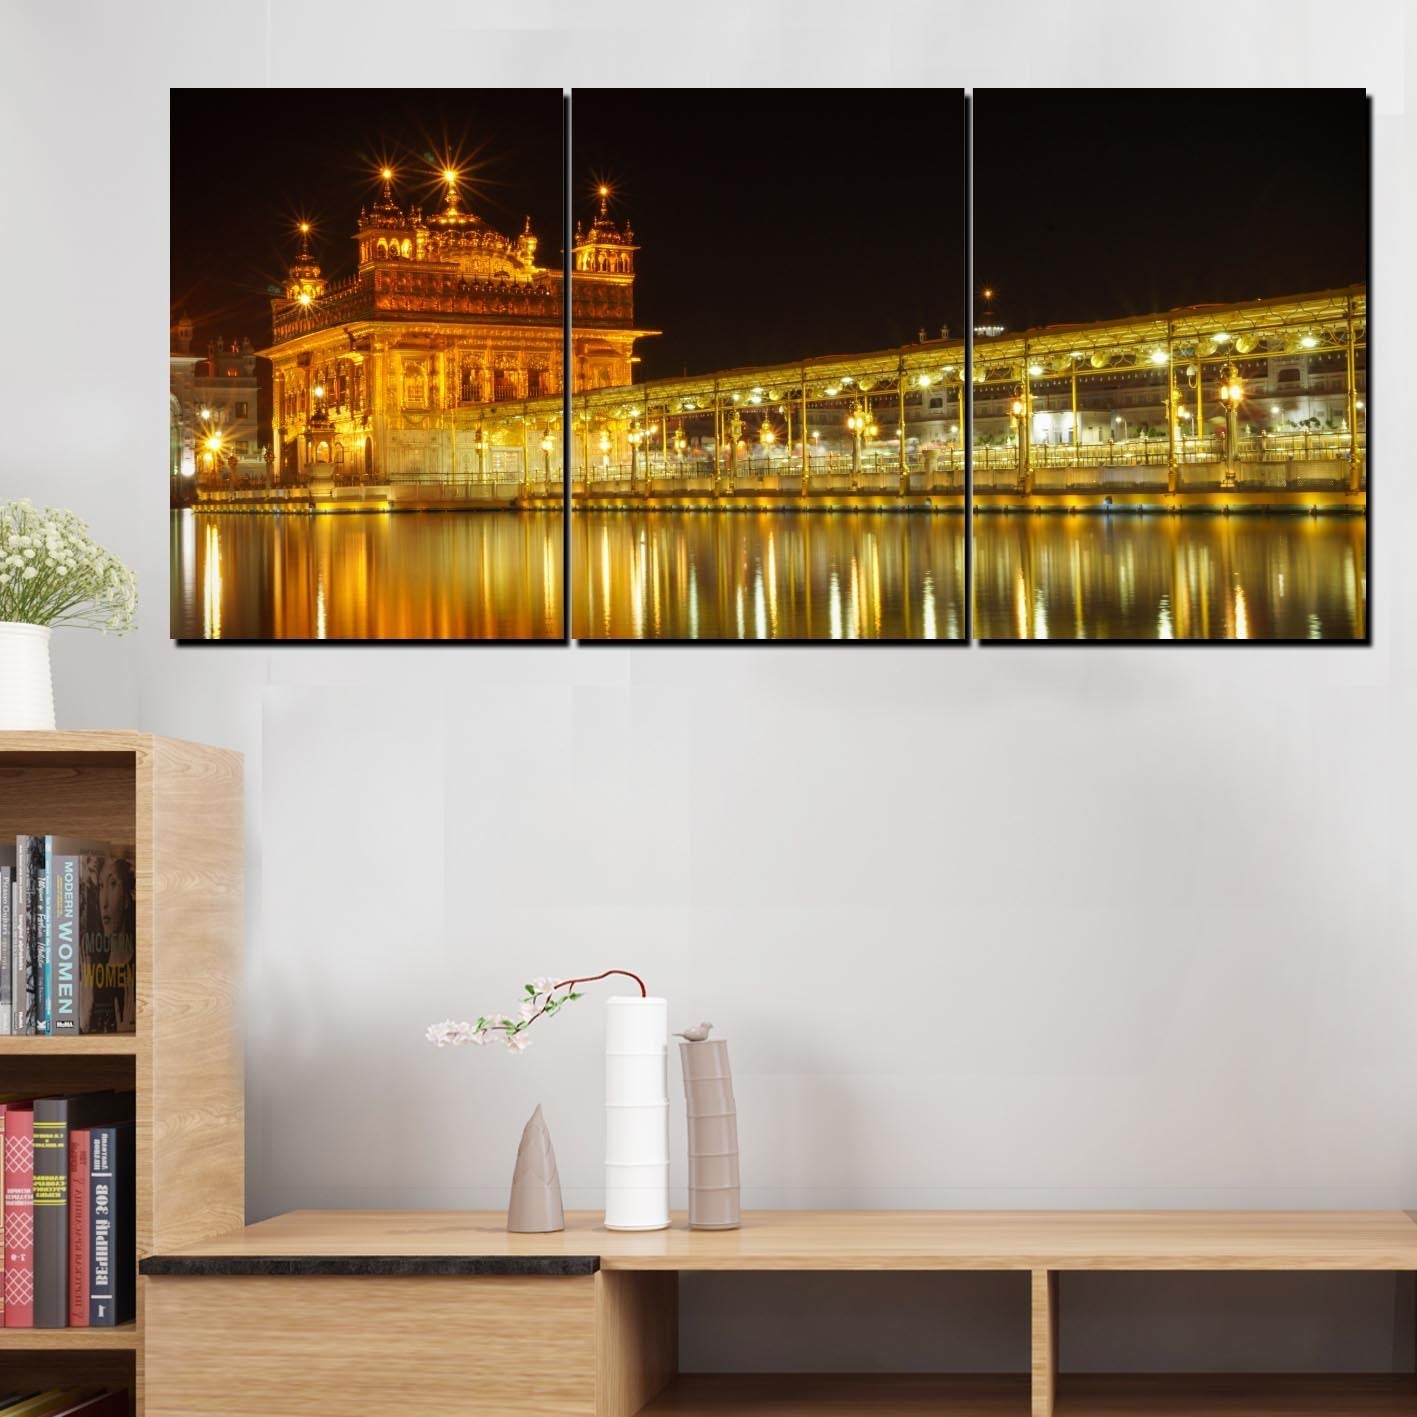 https://cdn.shopify.com/s/files/1/0387/9986/8044/products/Golden_Temple_3_Panel_1.jpg